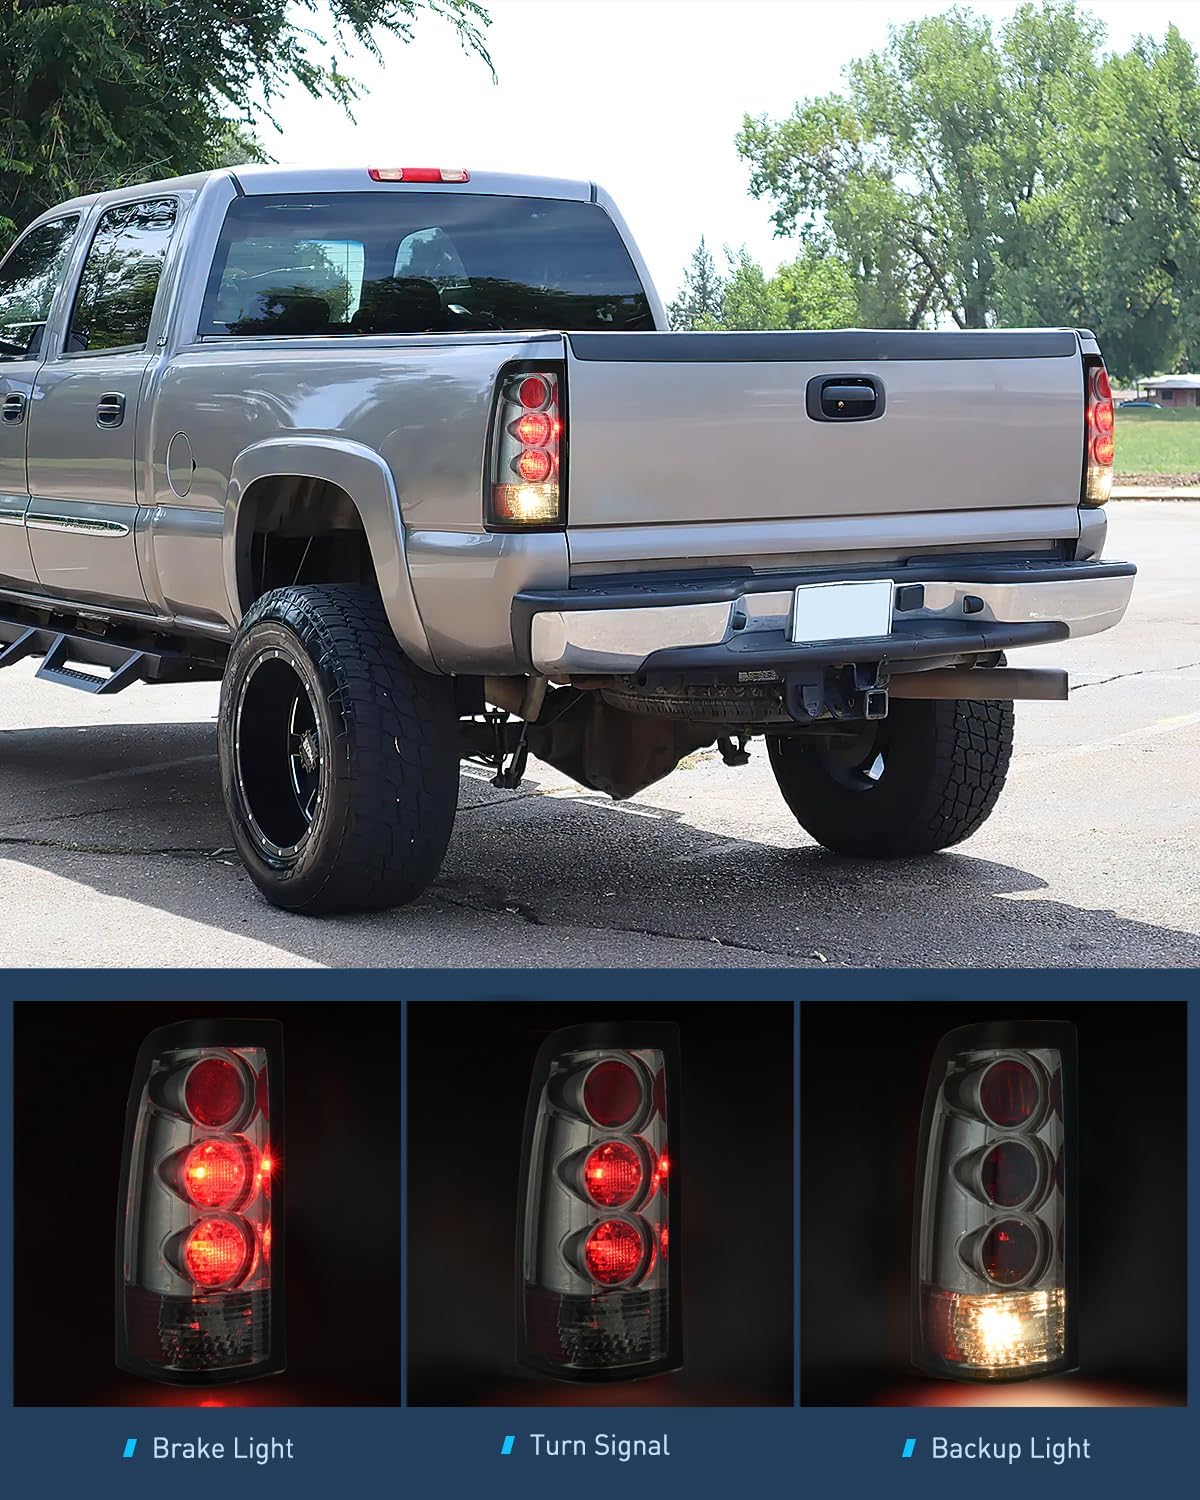 1999-2006 GMC Sierra 1999-2002 Chevy Silverado Taillight Assembly Rear Lamp Smoke Housing Rear Lamp Replacement Only Fits Fleetside Models Driver Passenger Side Nilight